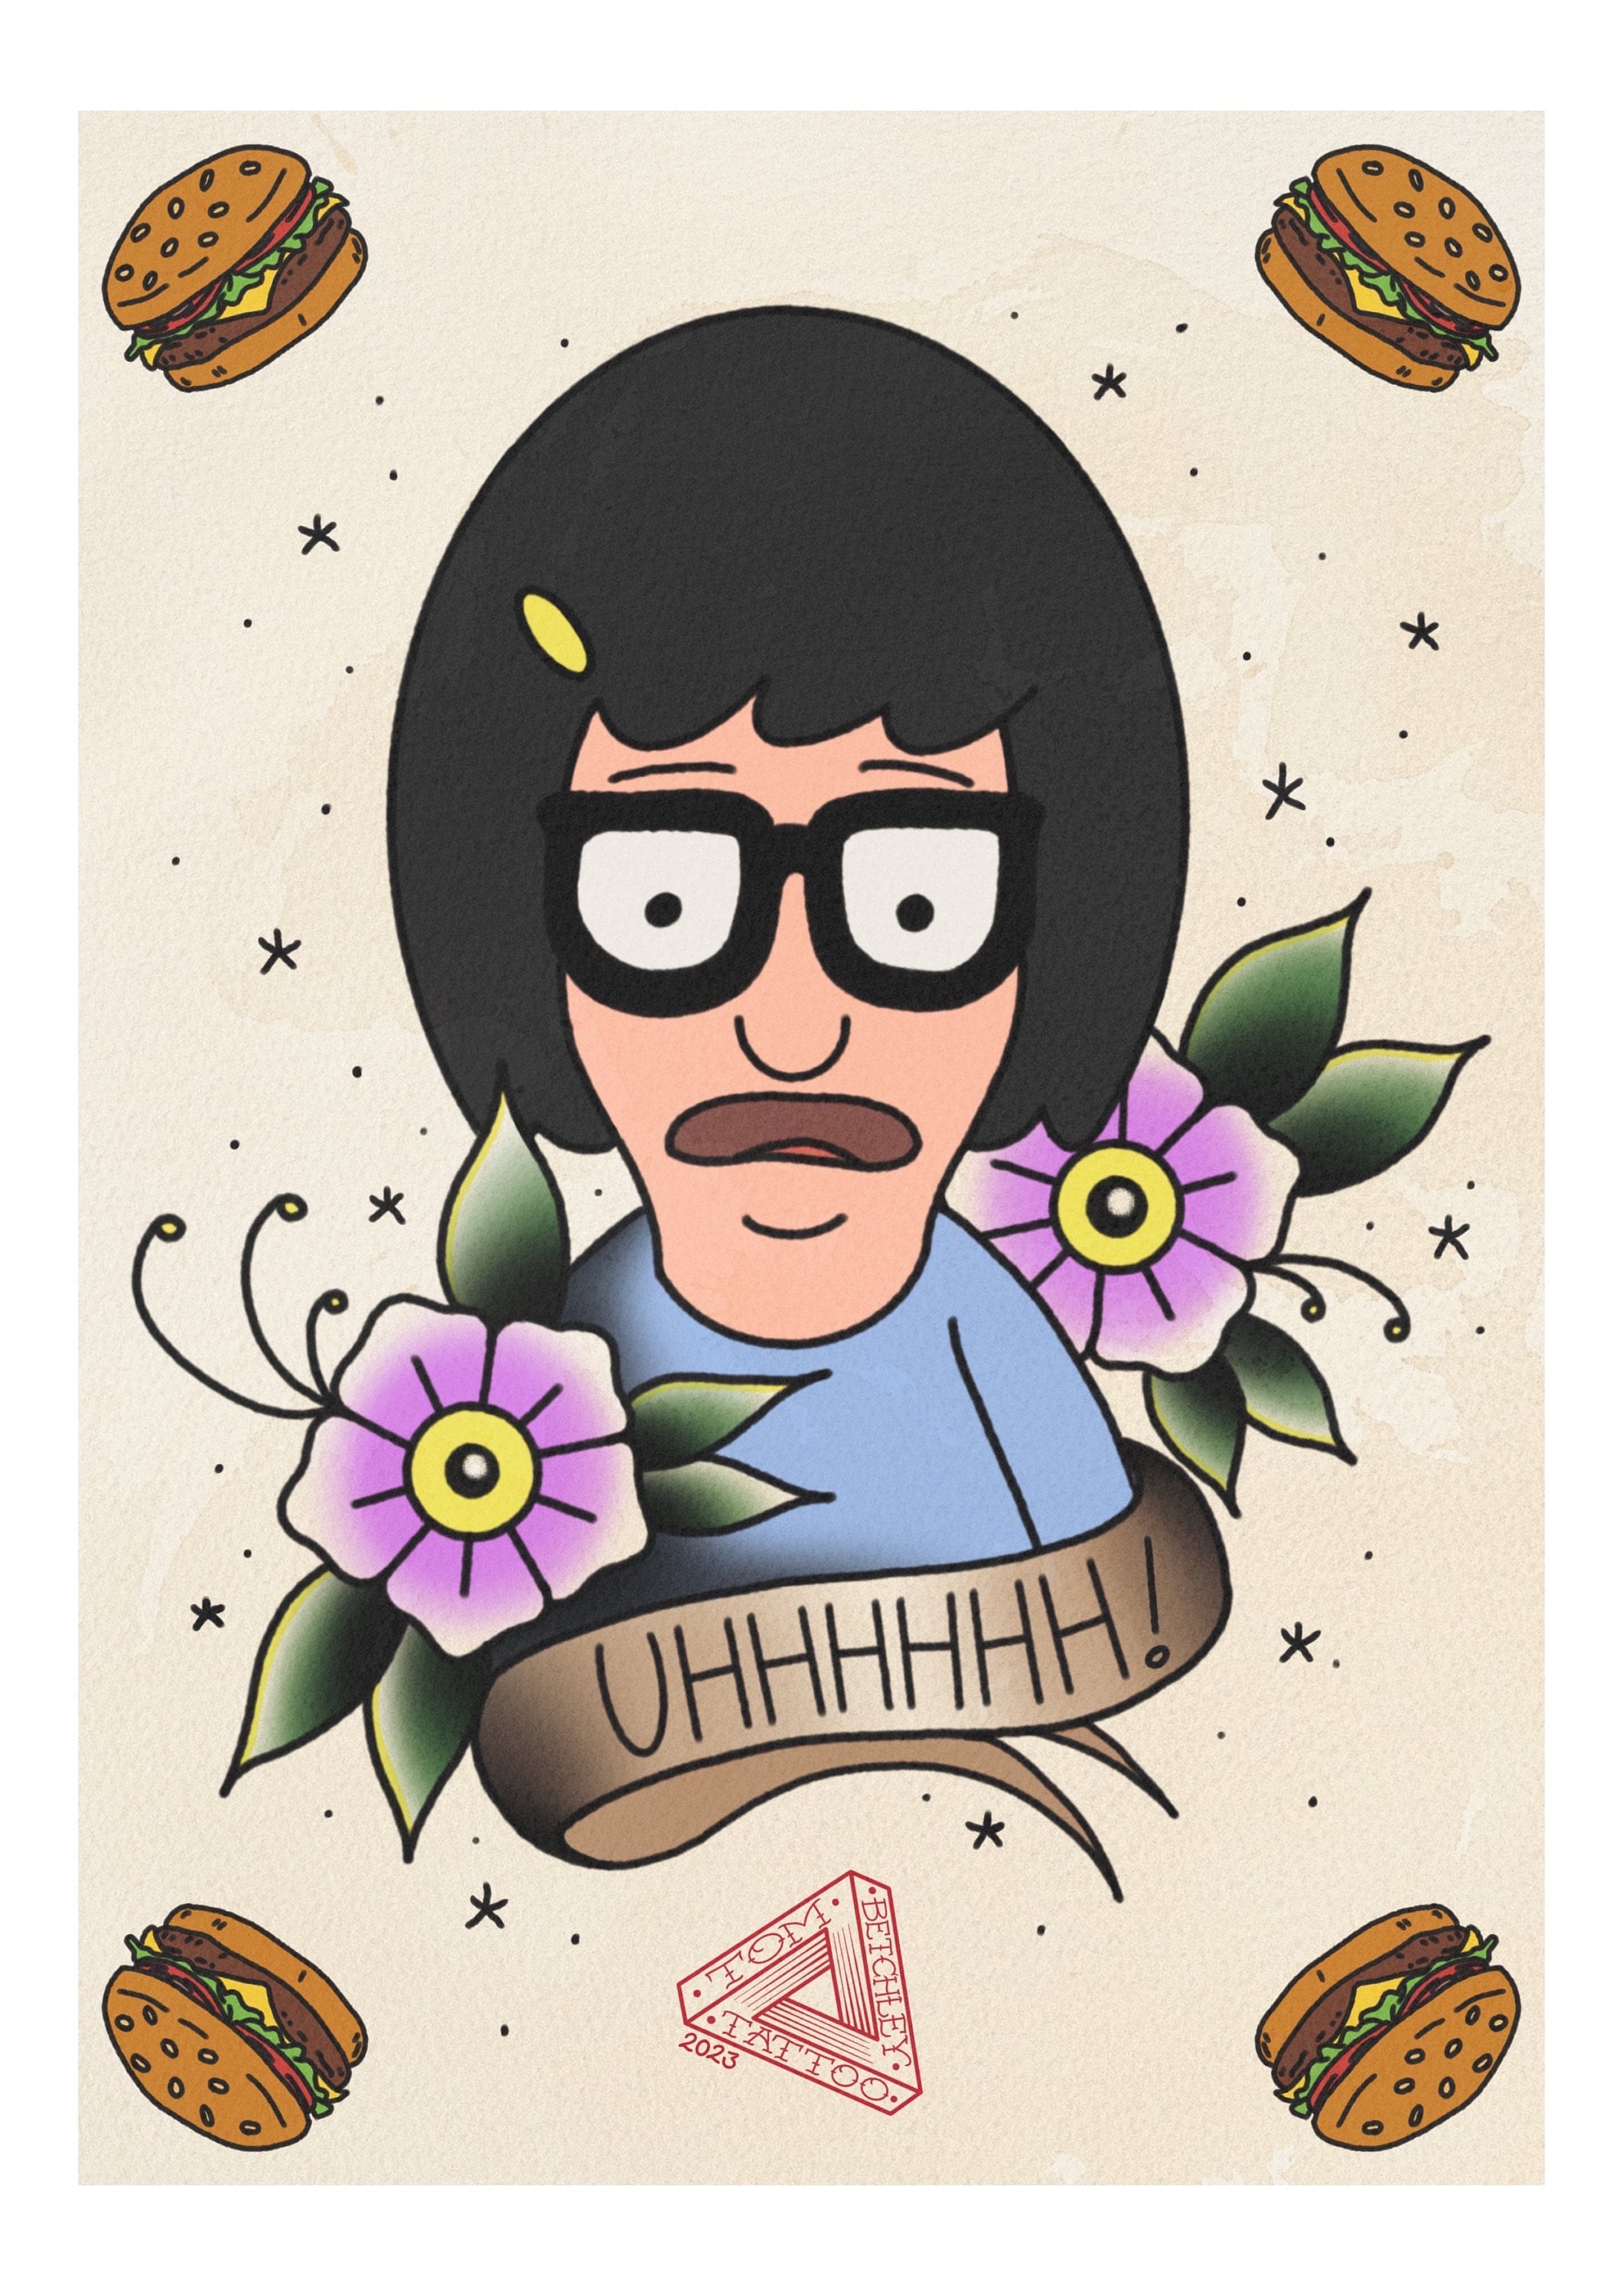 Bobs Burgers Pinup tattoo by ichasebadgers at starkweathertattoo in  Madison WI ichasebadgers janellehanson starkweathertattoo  Instagram